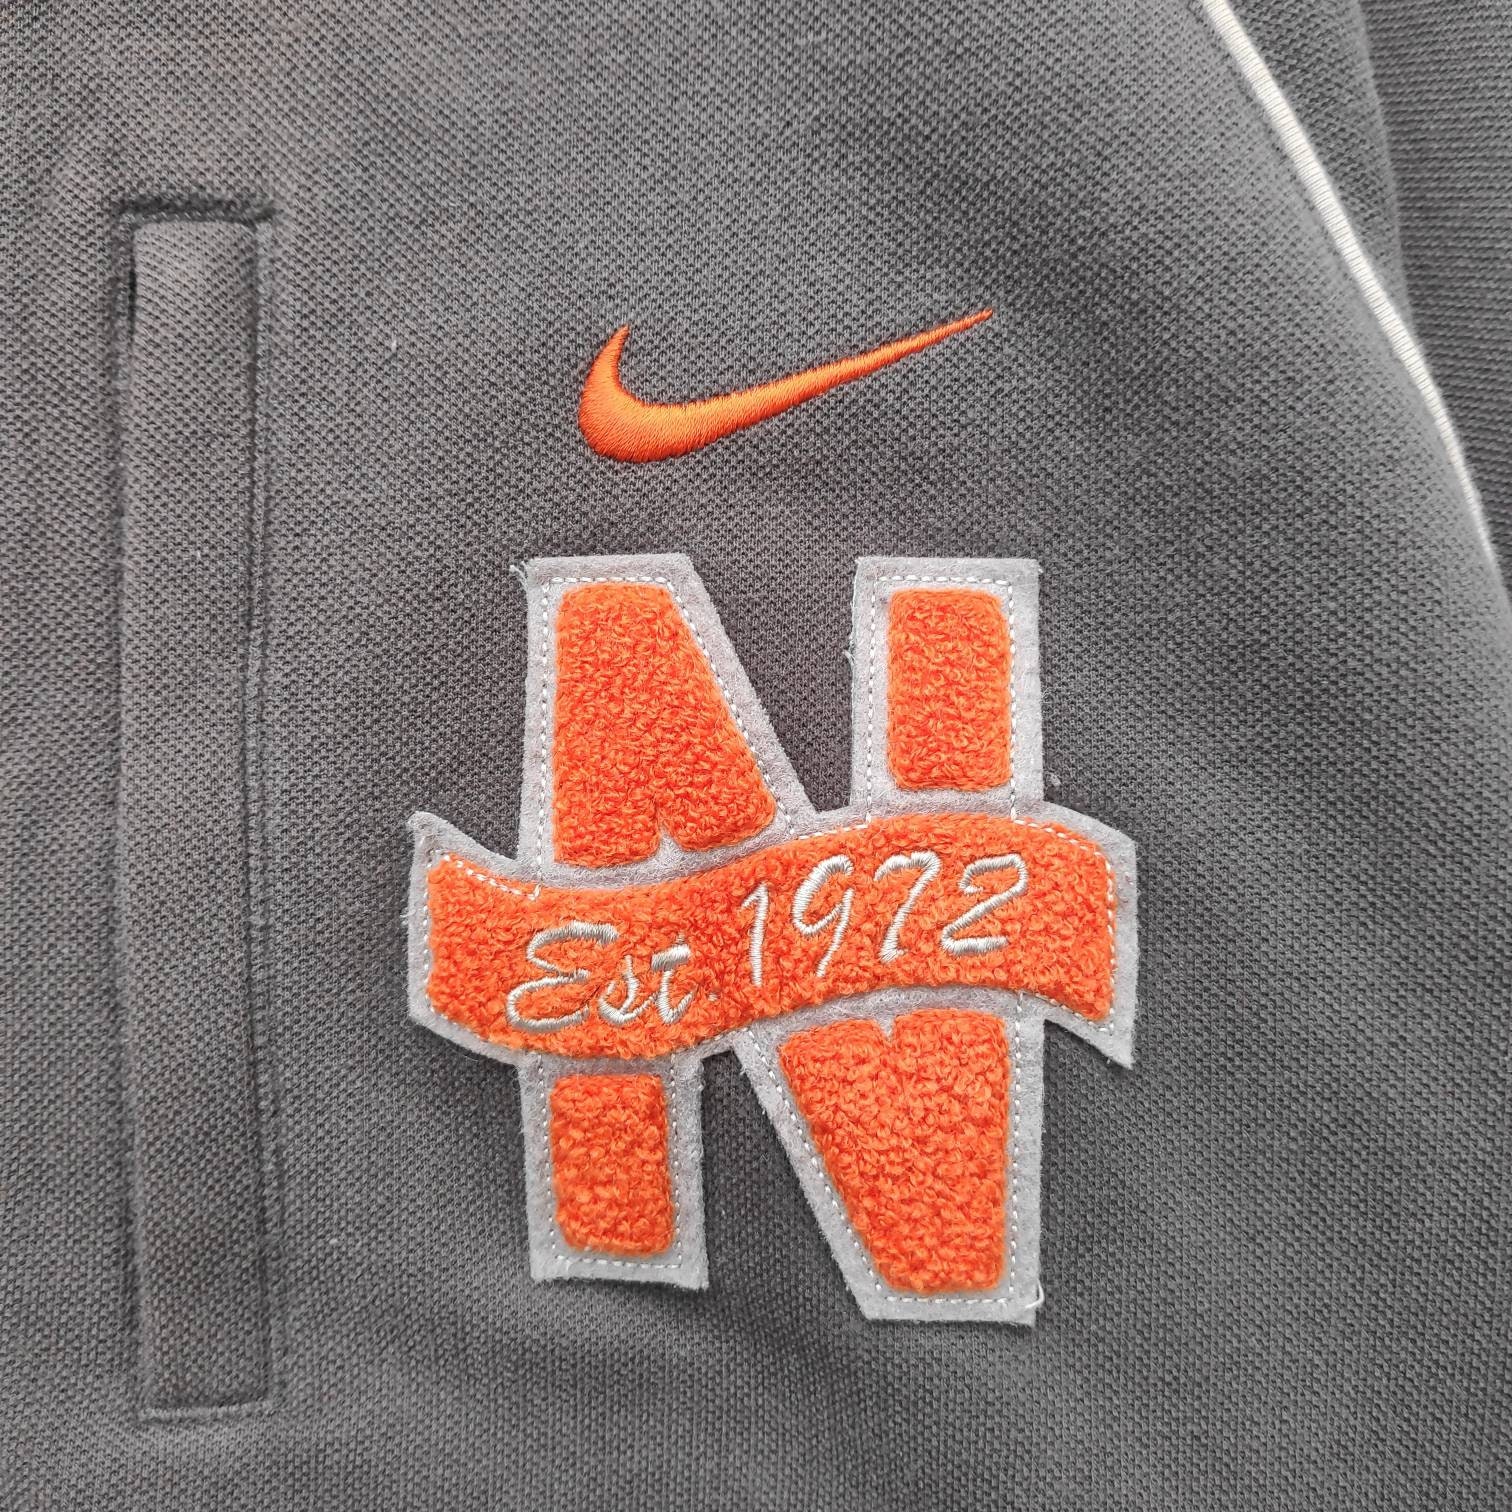 NIKE Sweater Pullover Jumper Embroidery Logo Full Zip Sports | Etsy